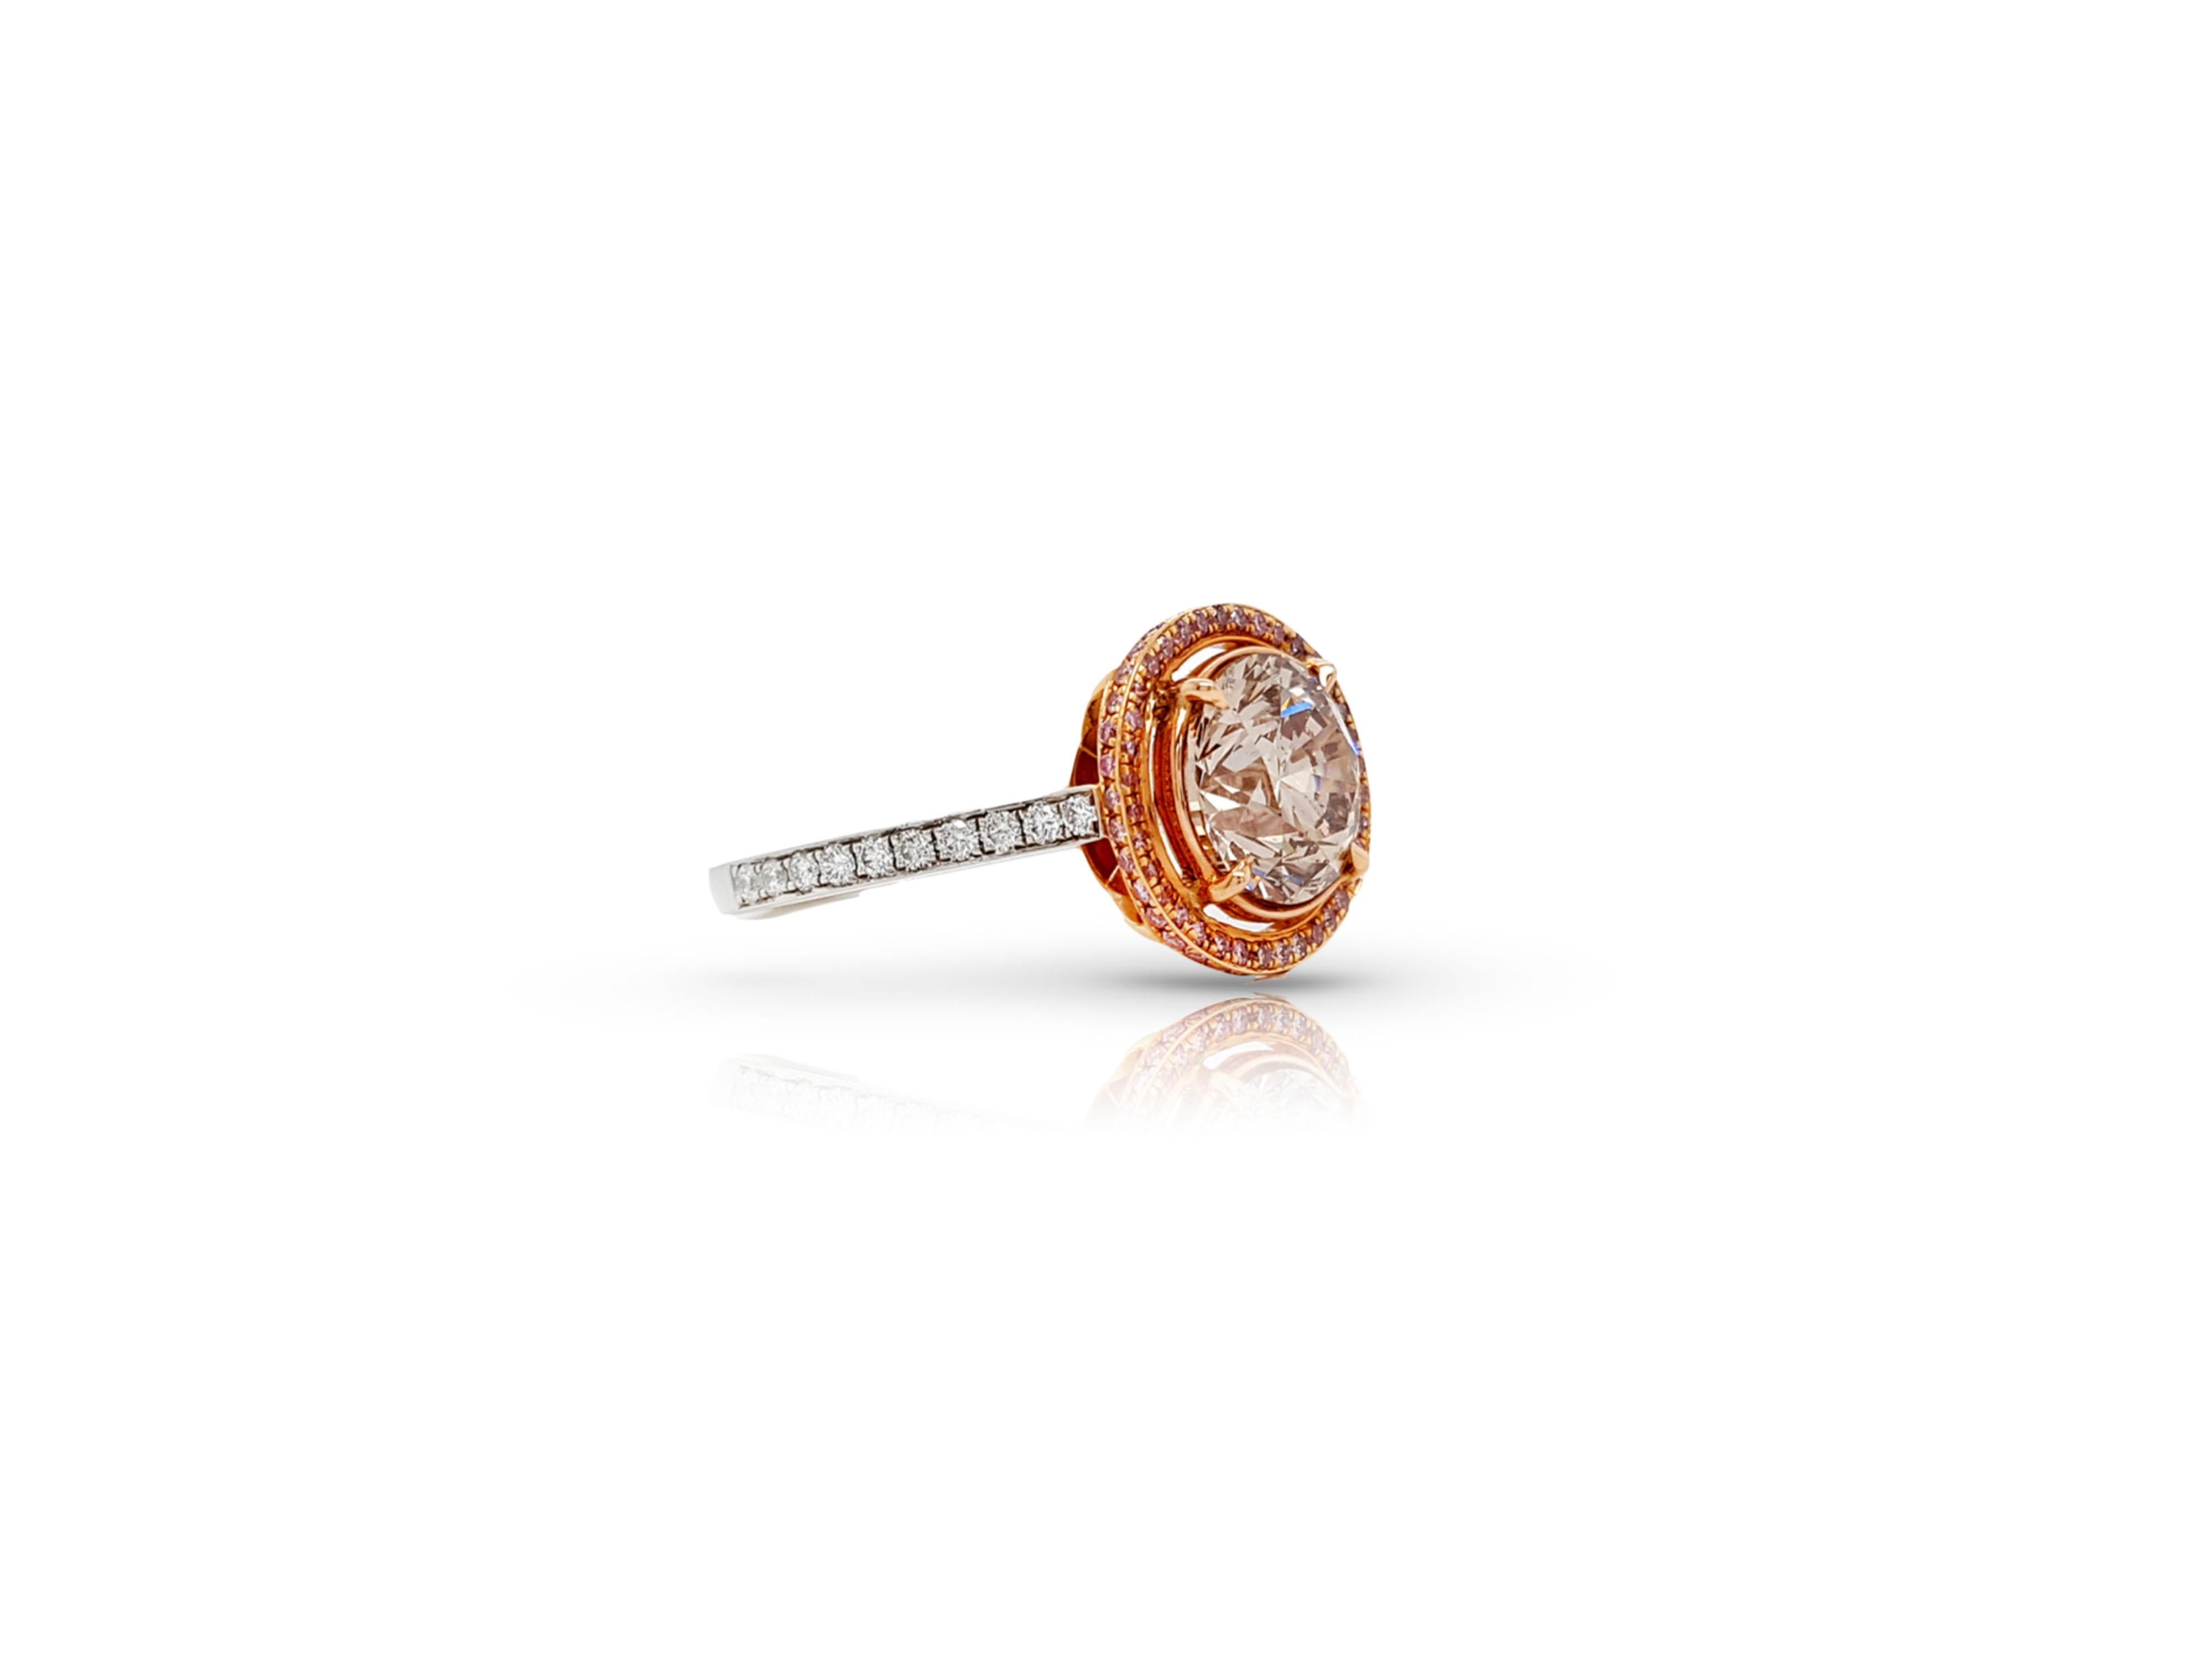 Contemporary 3.70 Carat Round Cut Brown, Pink And White Diamond, Engagement Ring in Platinum. For Sale